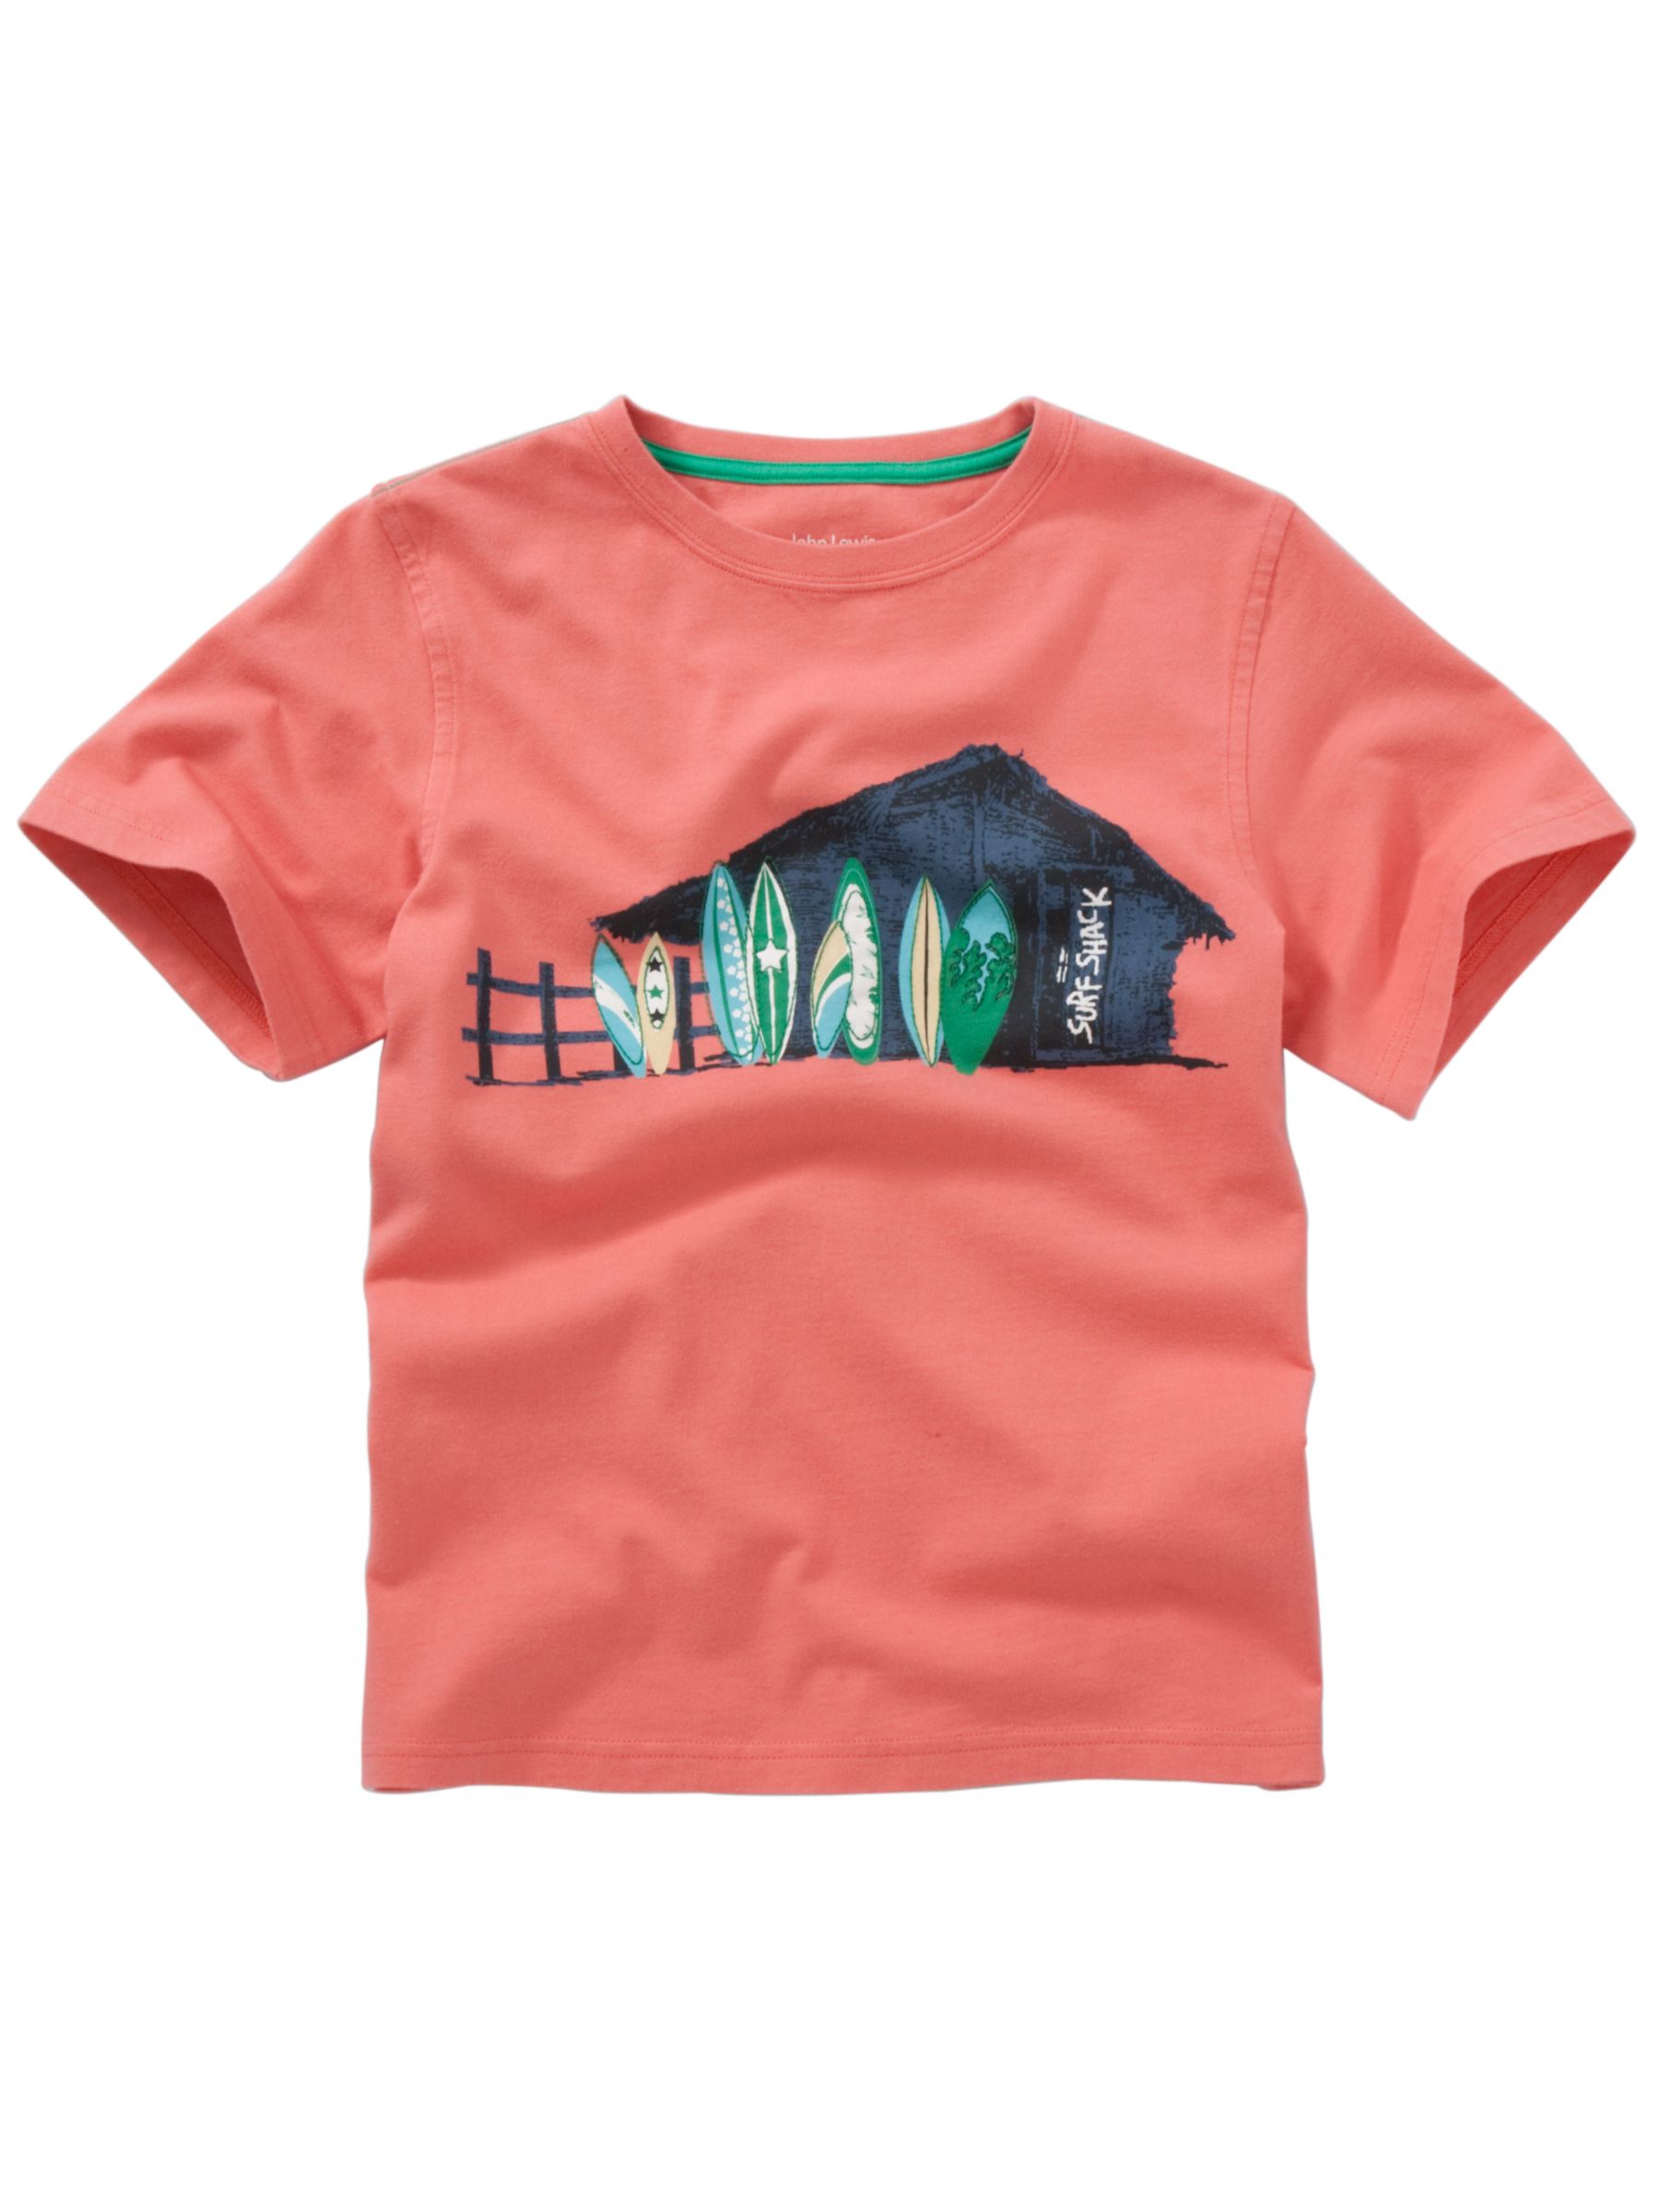 Surfboard Graphic T-Shirt, Coral